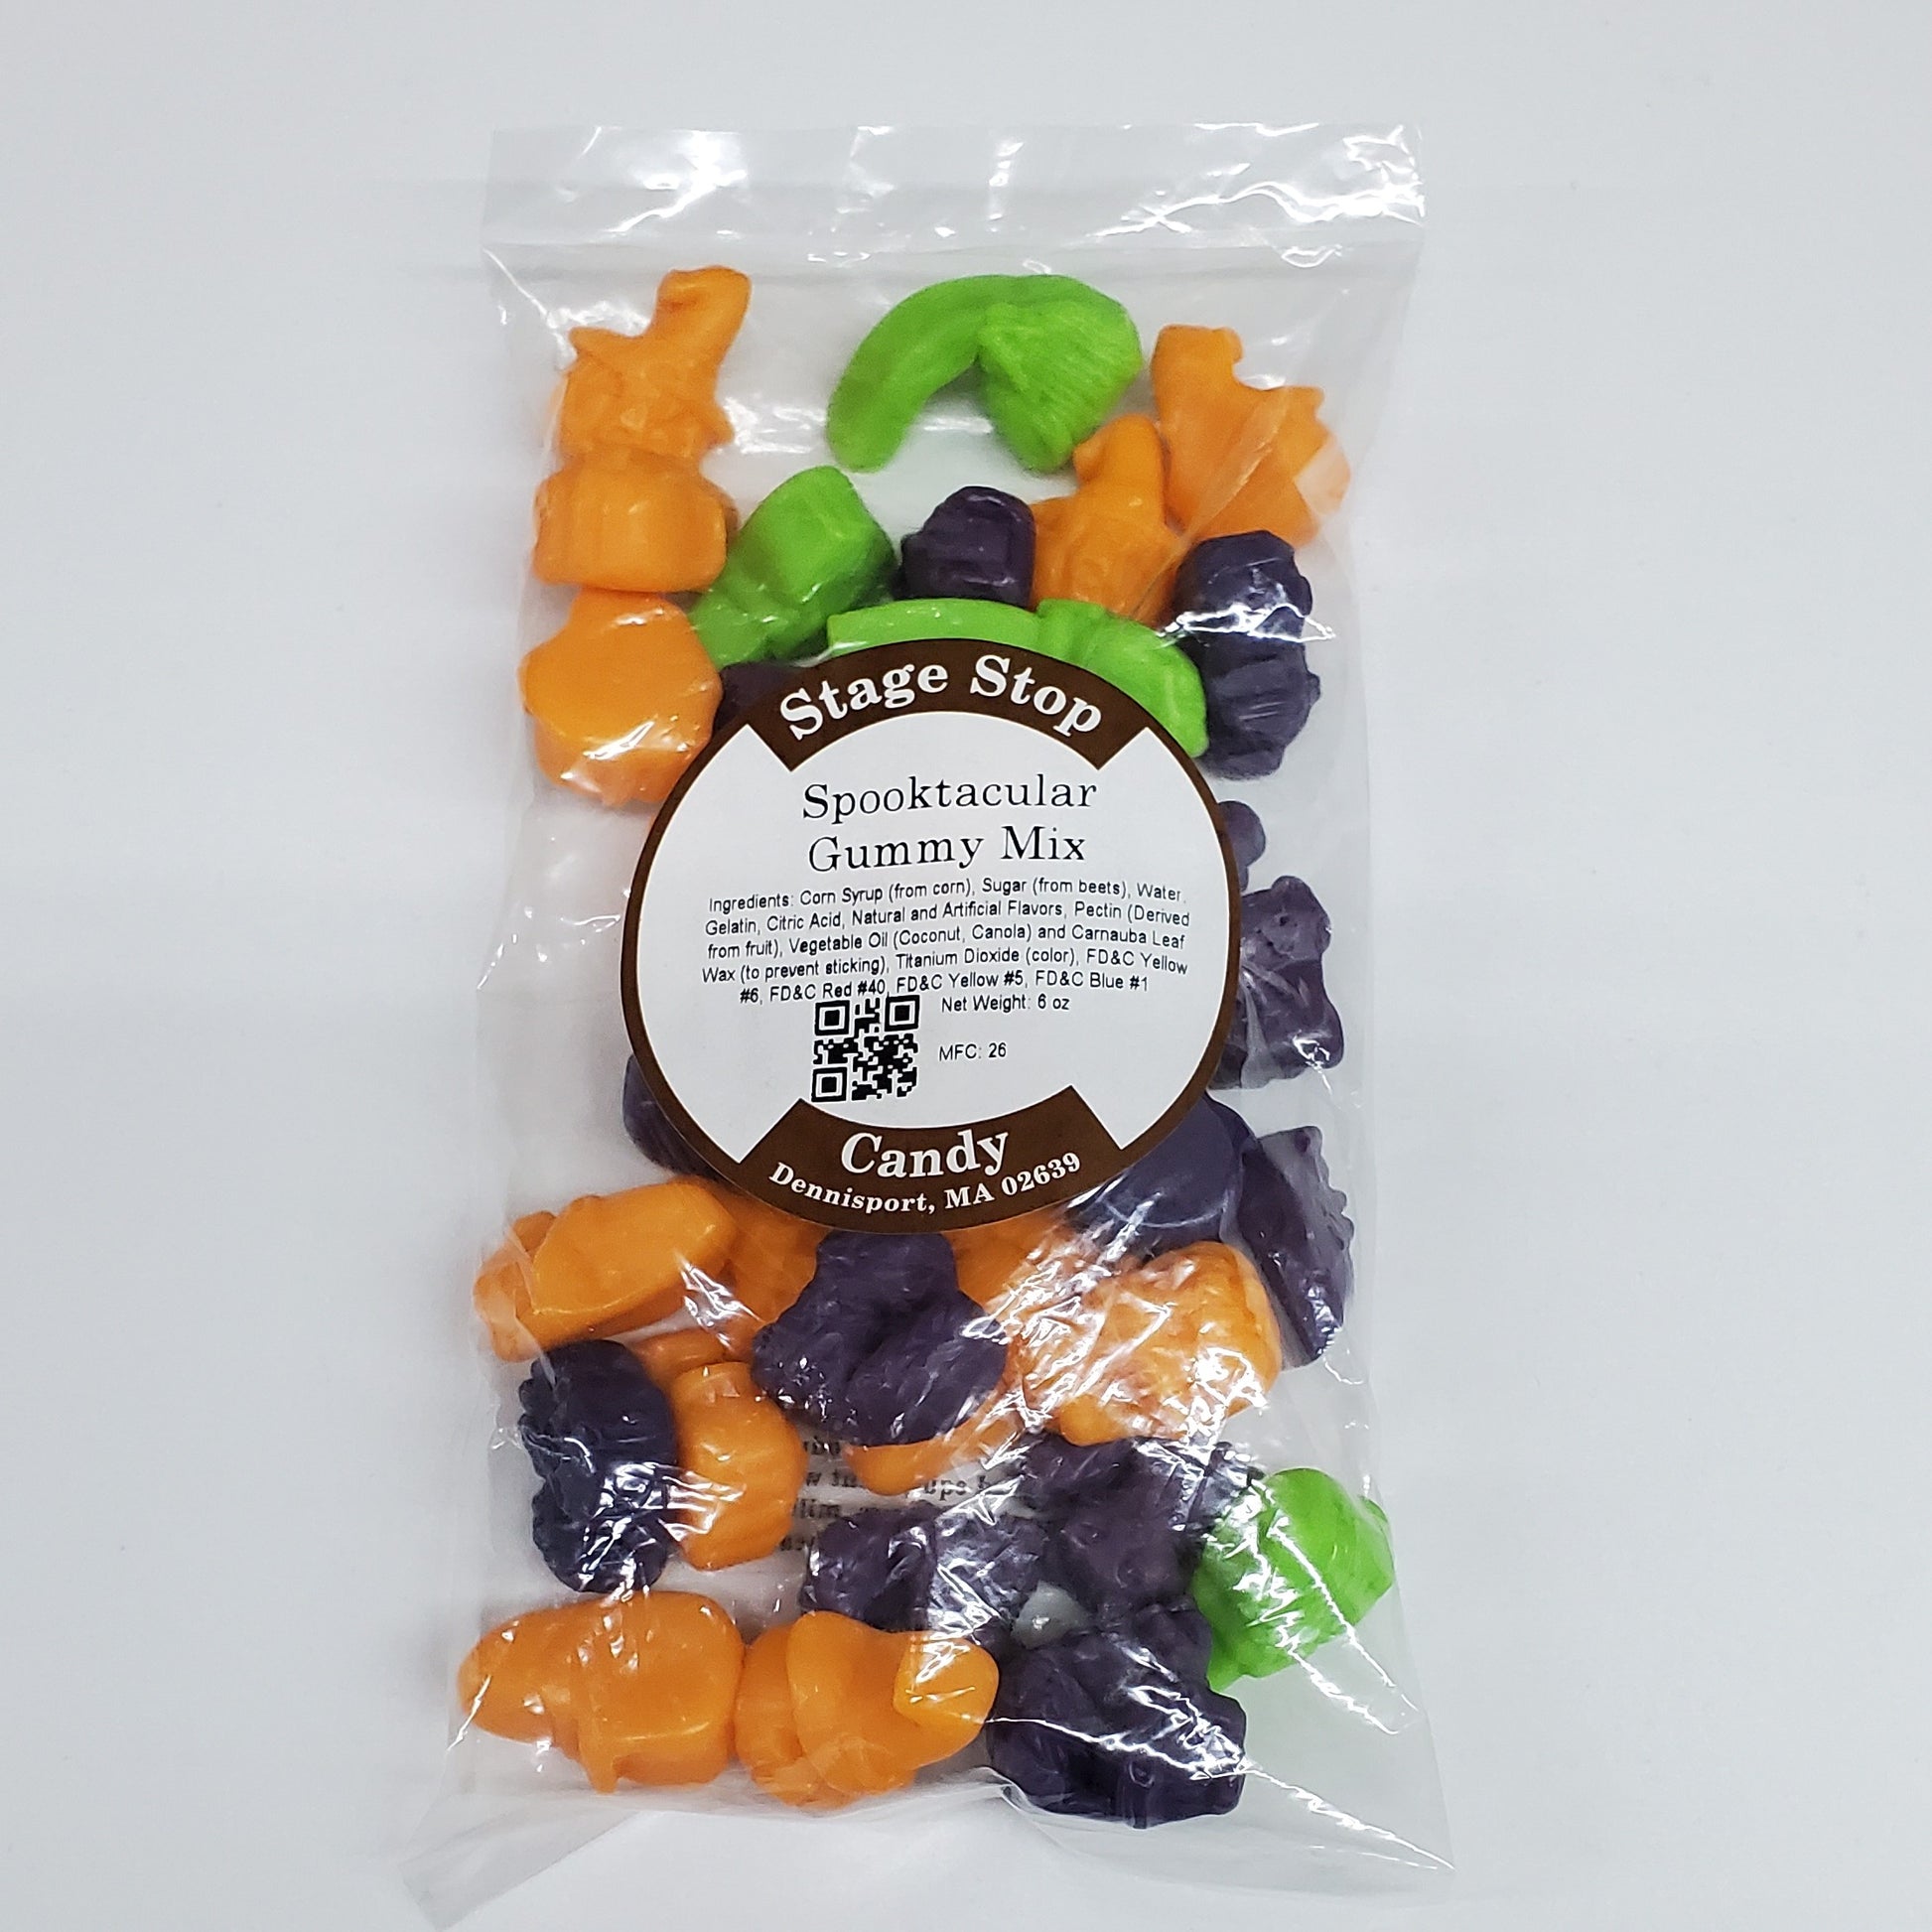 Bag of Halloween Gummy Mix with Orange flavored jack-o'-lanterns, Grape flavored kittens, and Green Apple flavored witches' broomsticks.